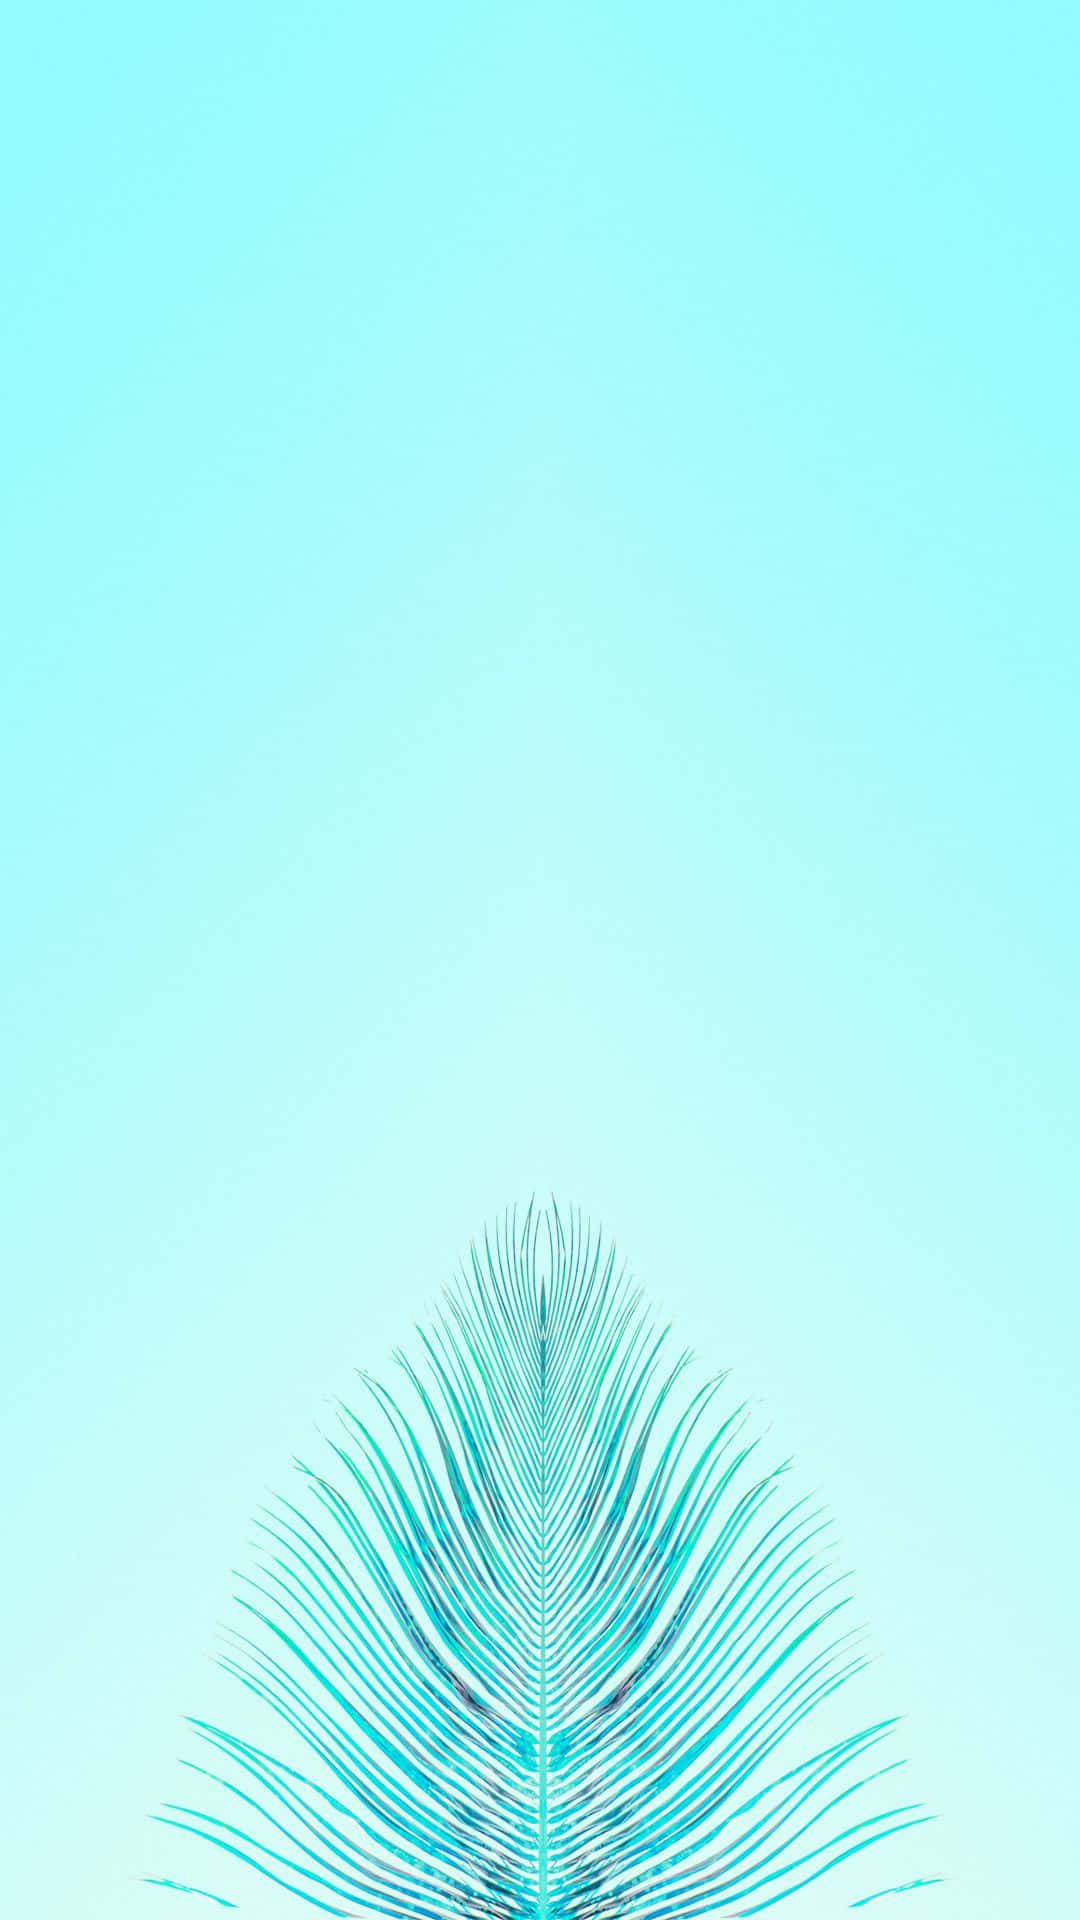 Upgrade the way you take and share photos with this stunning Turquoise iPhone. Wallpaper